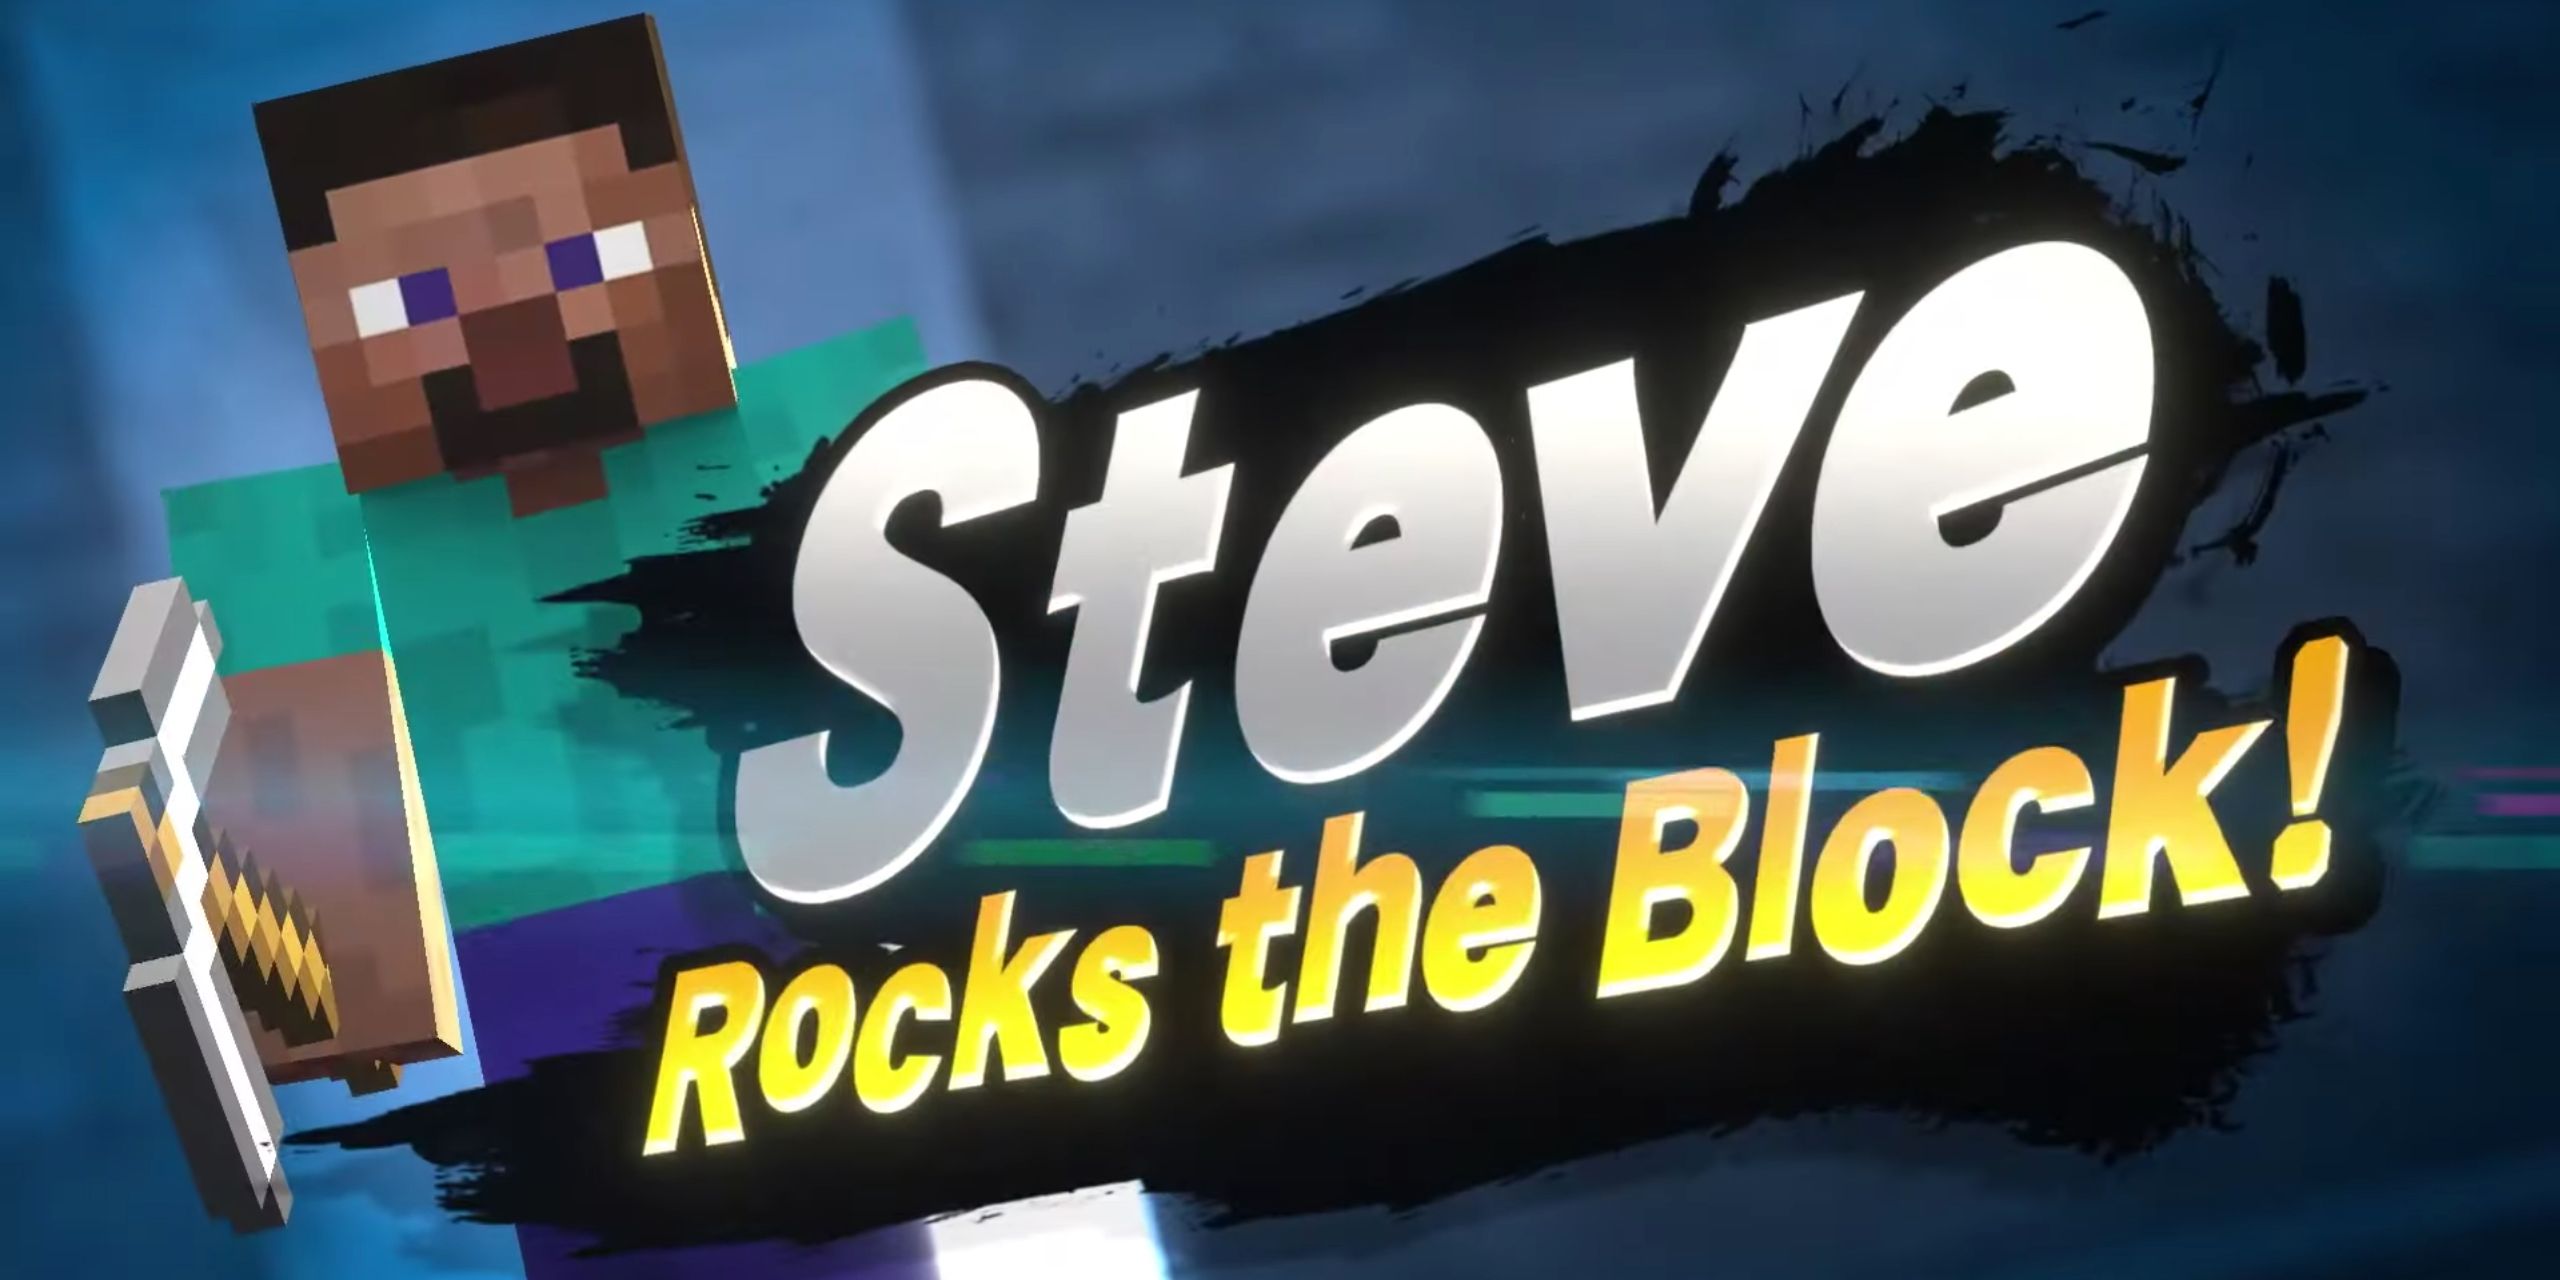 A splash screen showing Steve from Minecraft joining Smash Bros. Ultimate